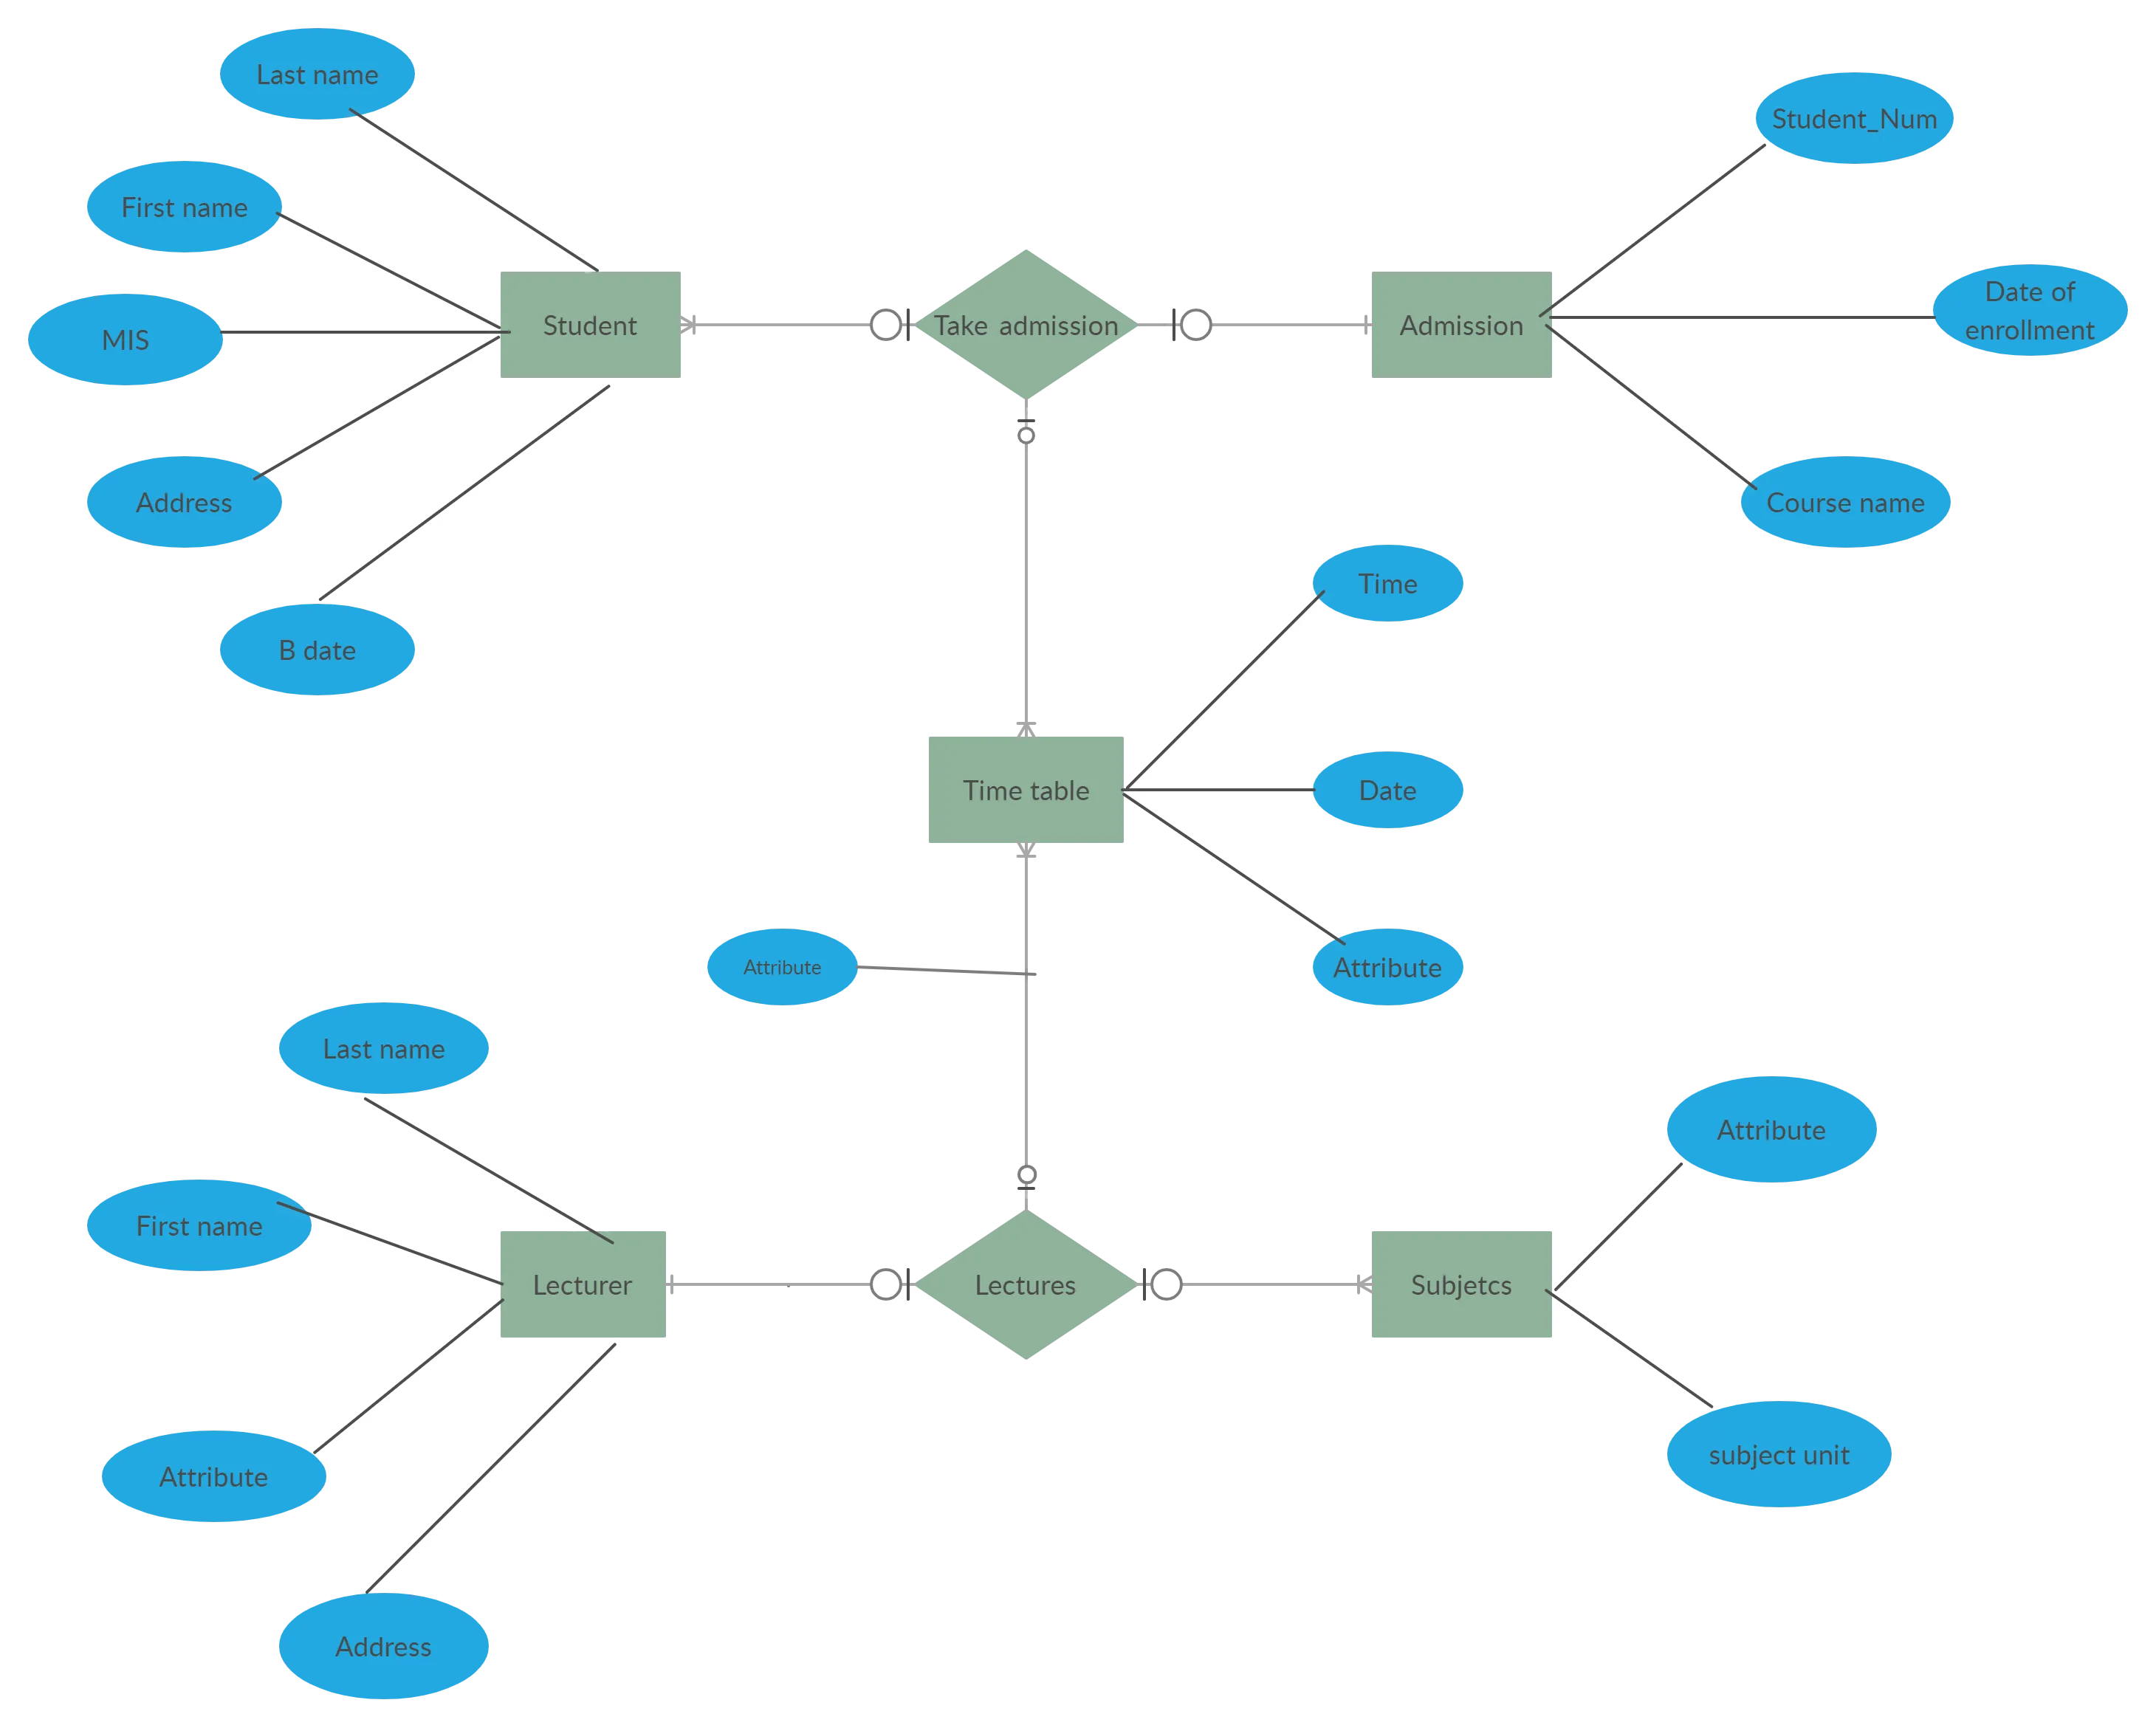 Example of an Entity Relationship Diagram